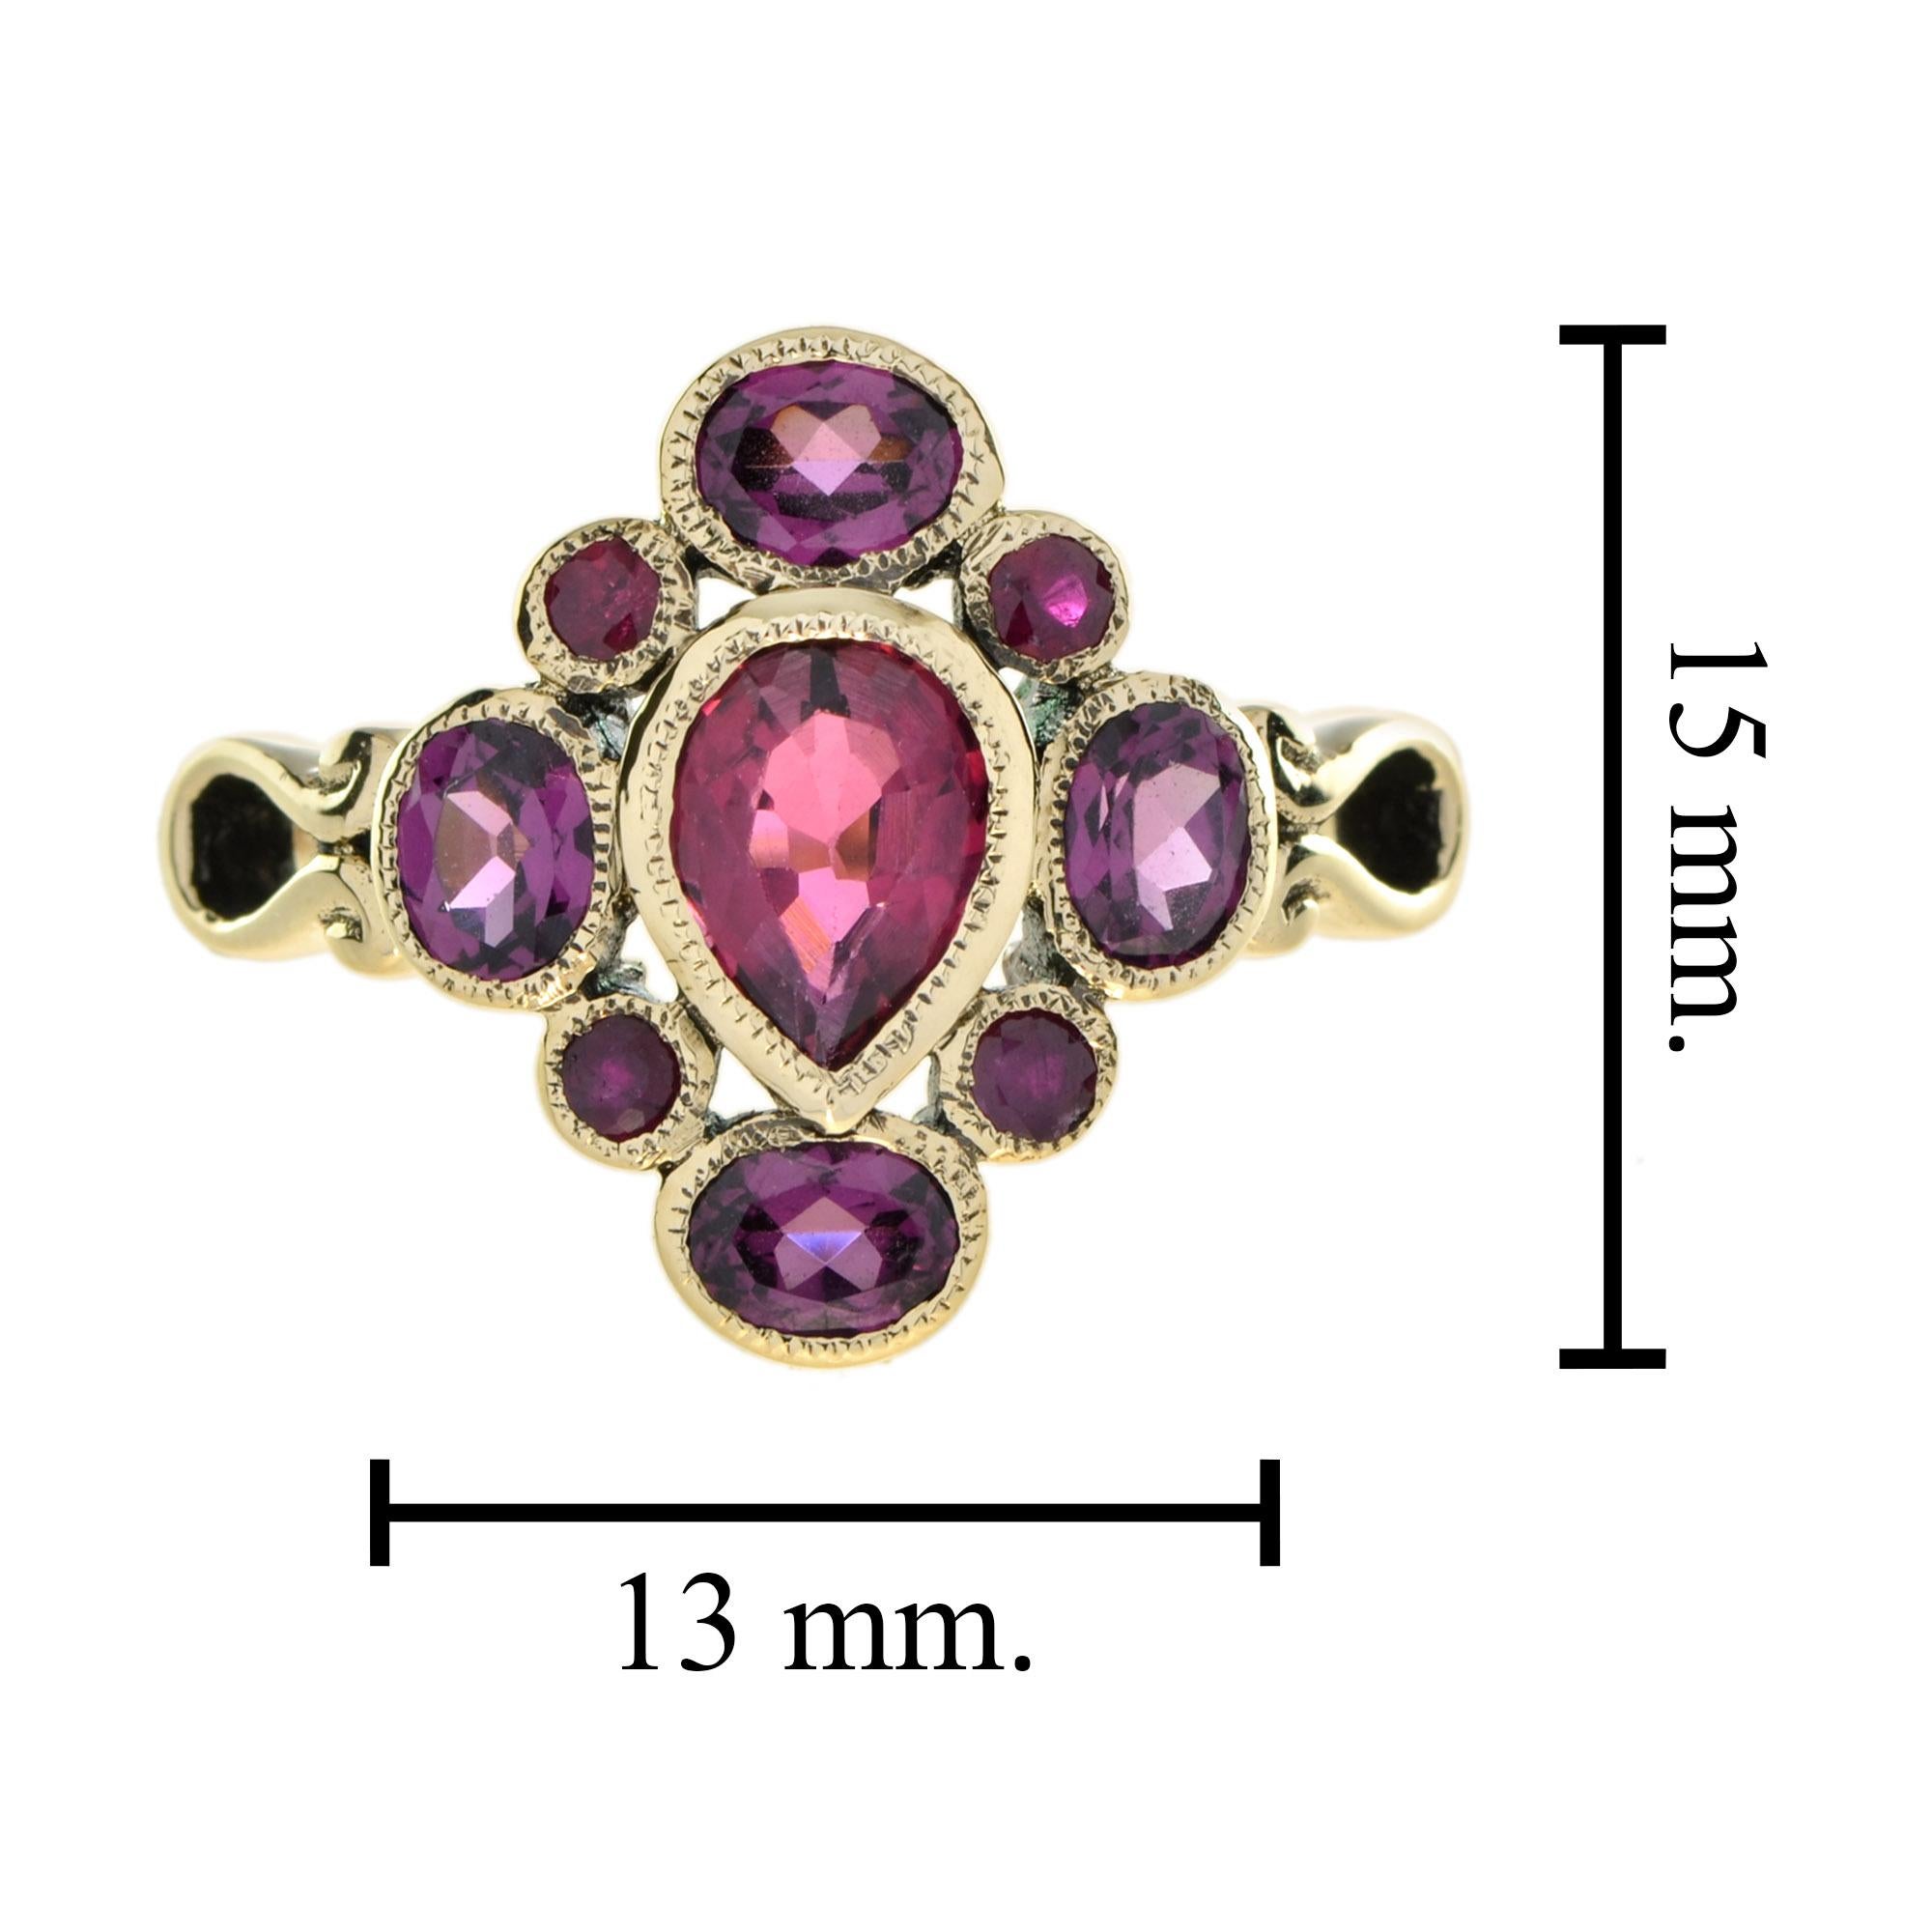 Vintage Style Pink Tourmaline with Ruby and Rhodolite Cluster Ring in 9K Gold 1